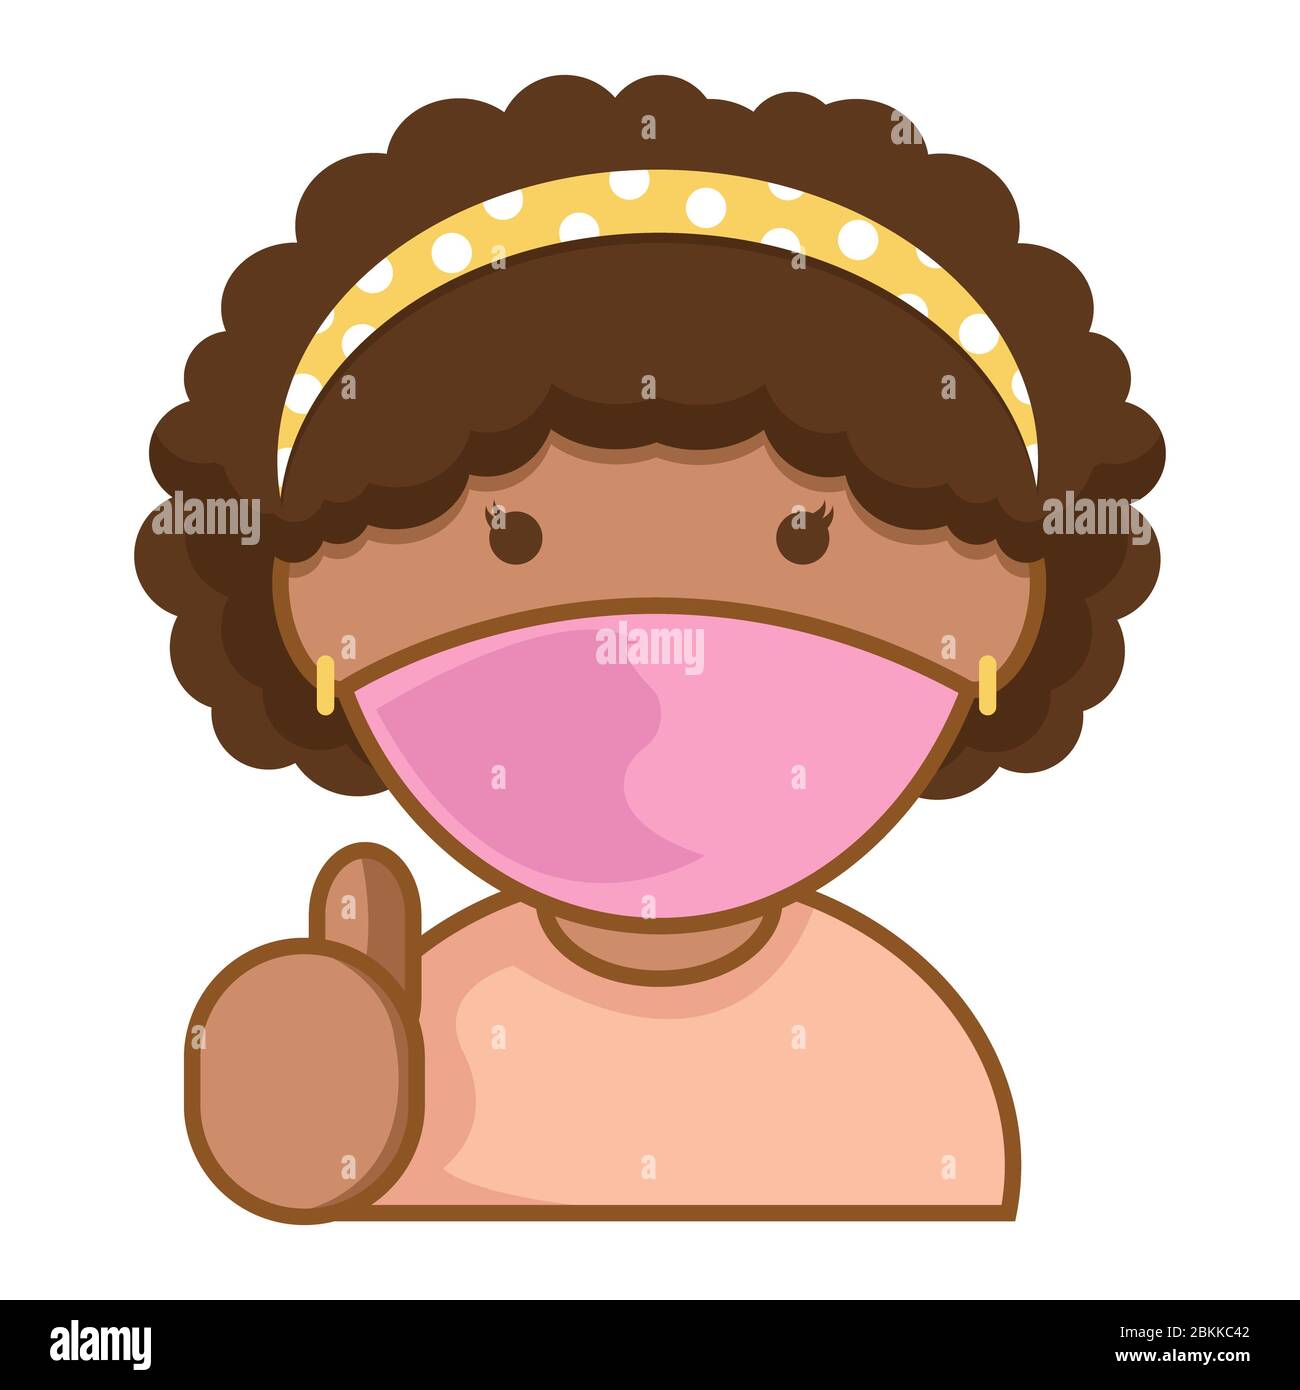 Simple Illustration Of African Girls With Curly Hair Wear Face Mask Stock Photo Alamy